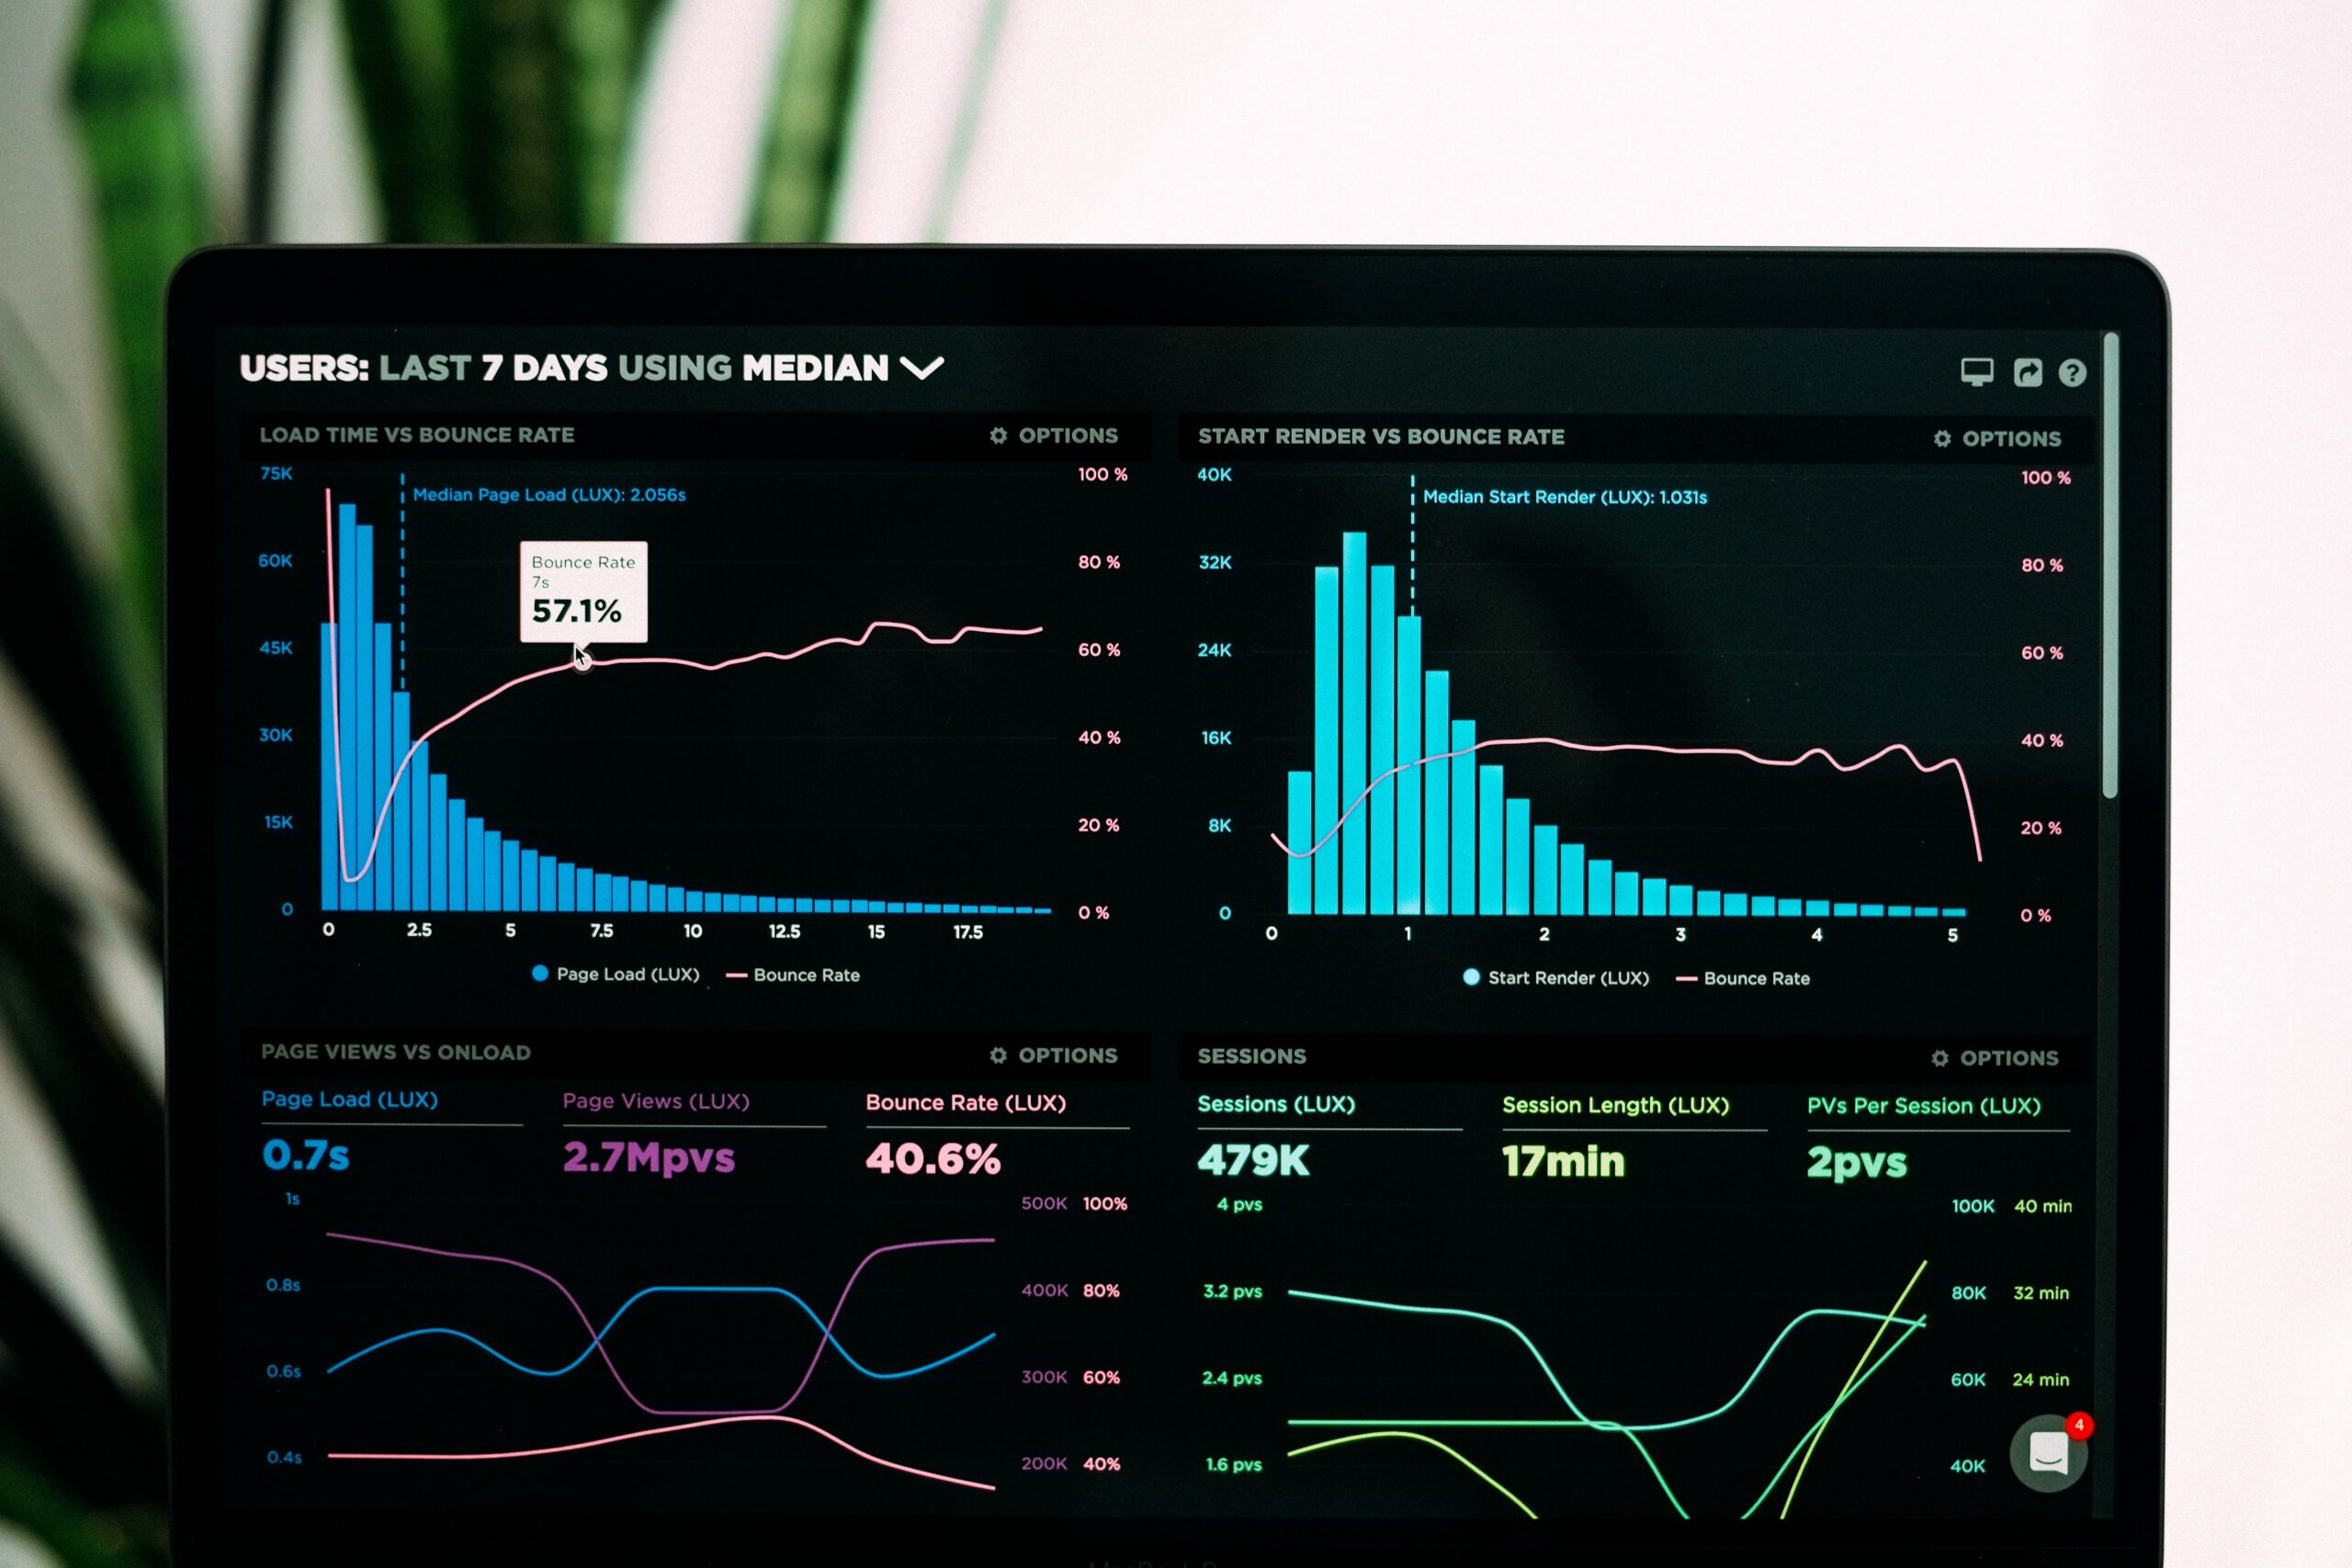 Data visualization is the graphical rep of data using visual elements like charts, graphs & maps